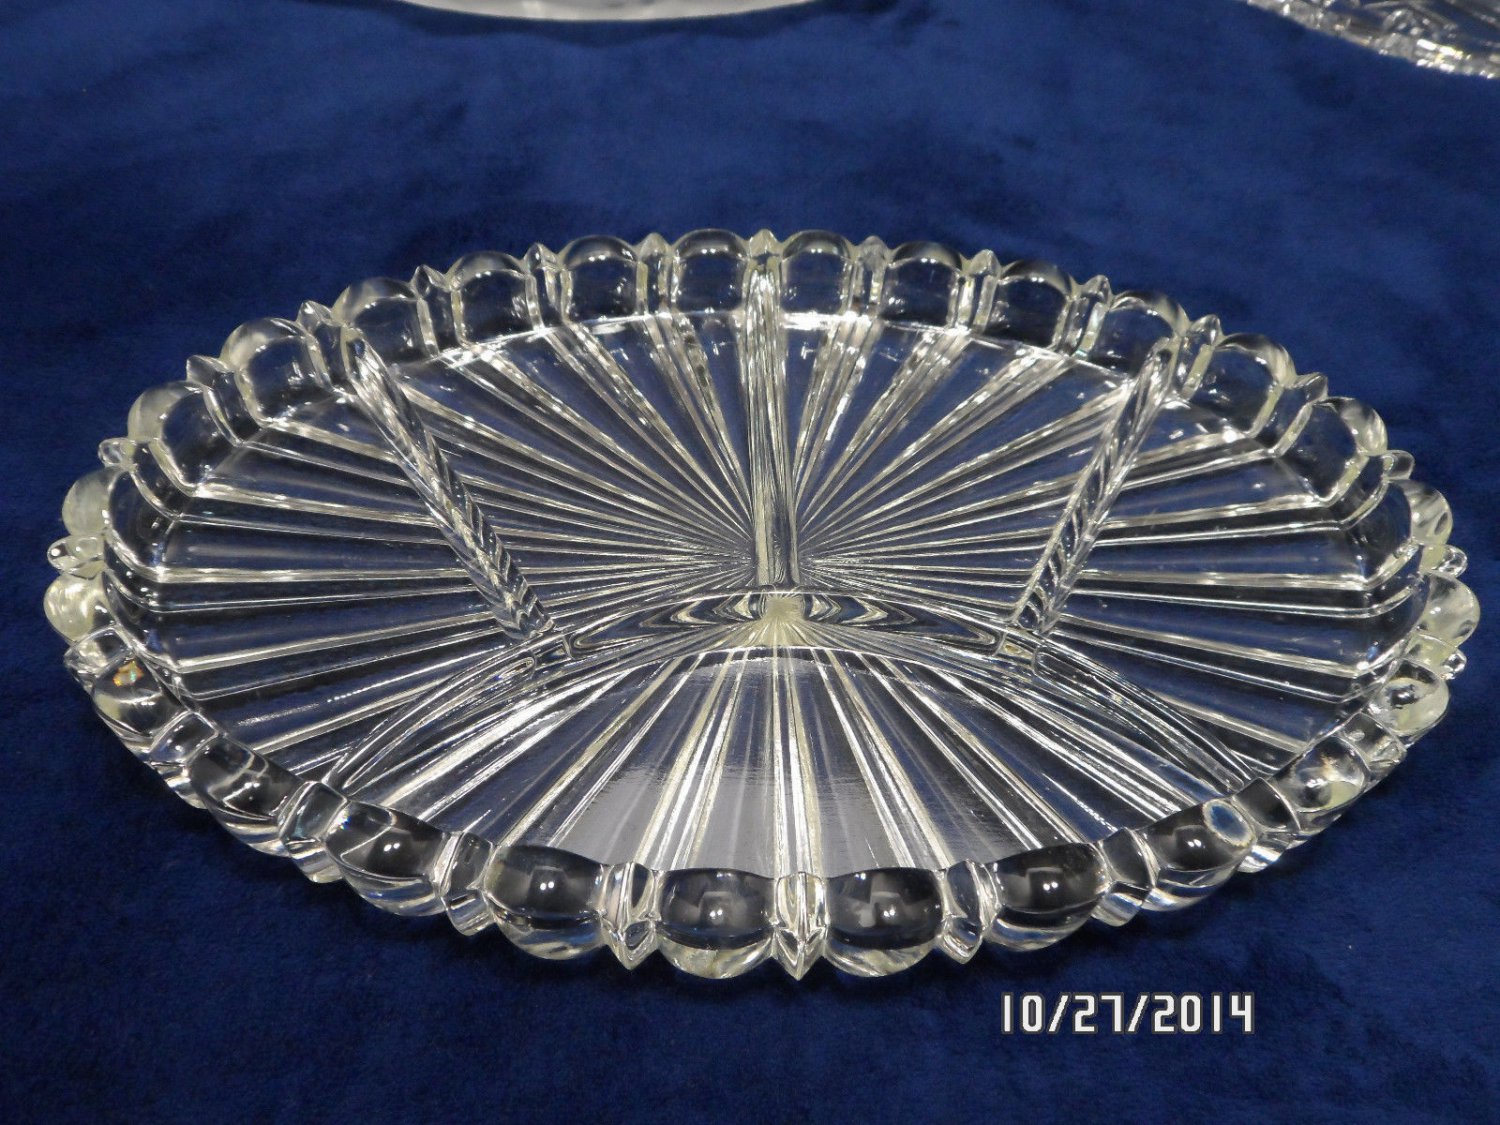 Vintage Vanity Tray Heavy Crystal has Five Sections